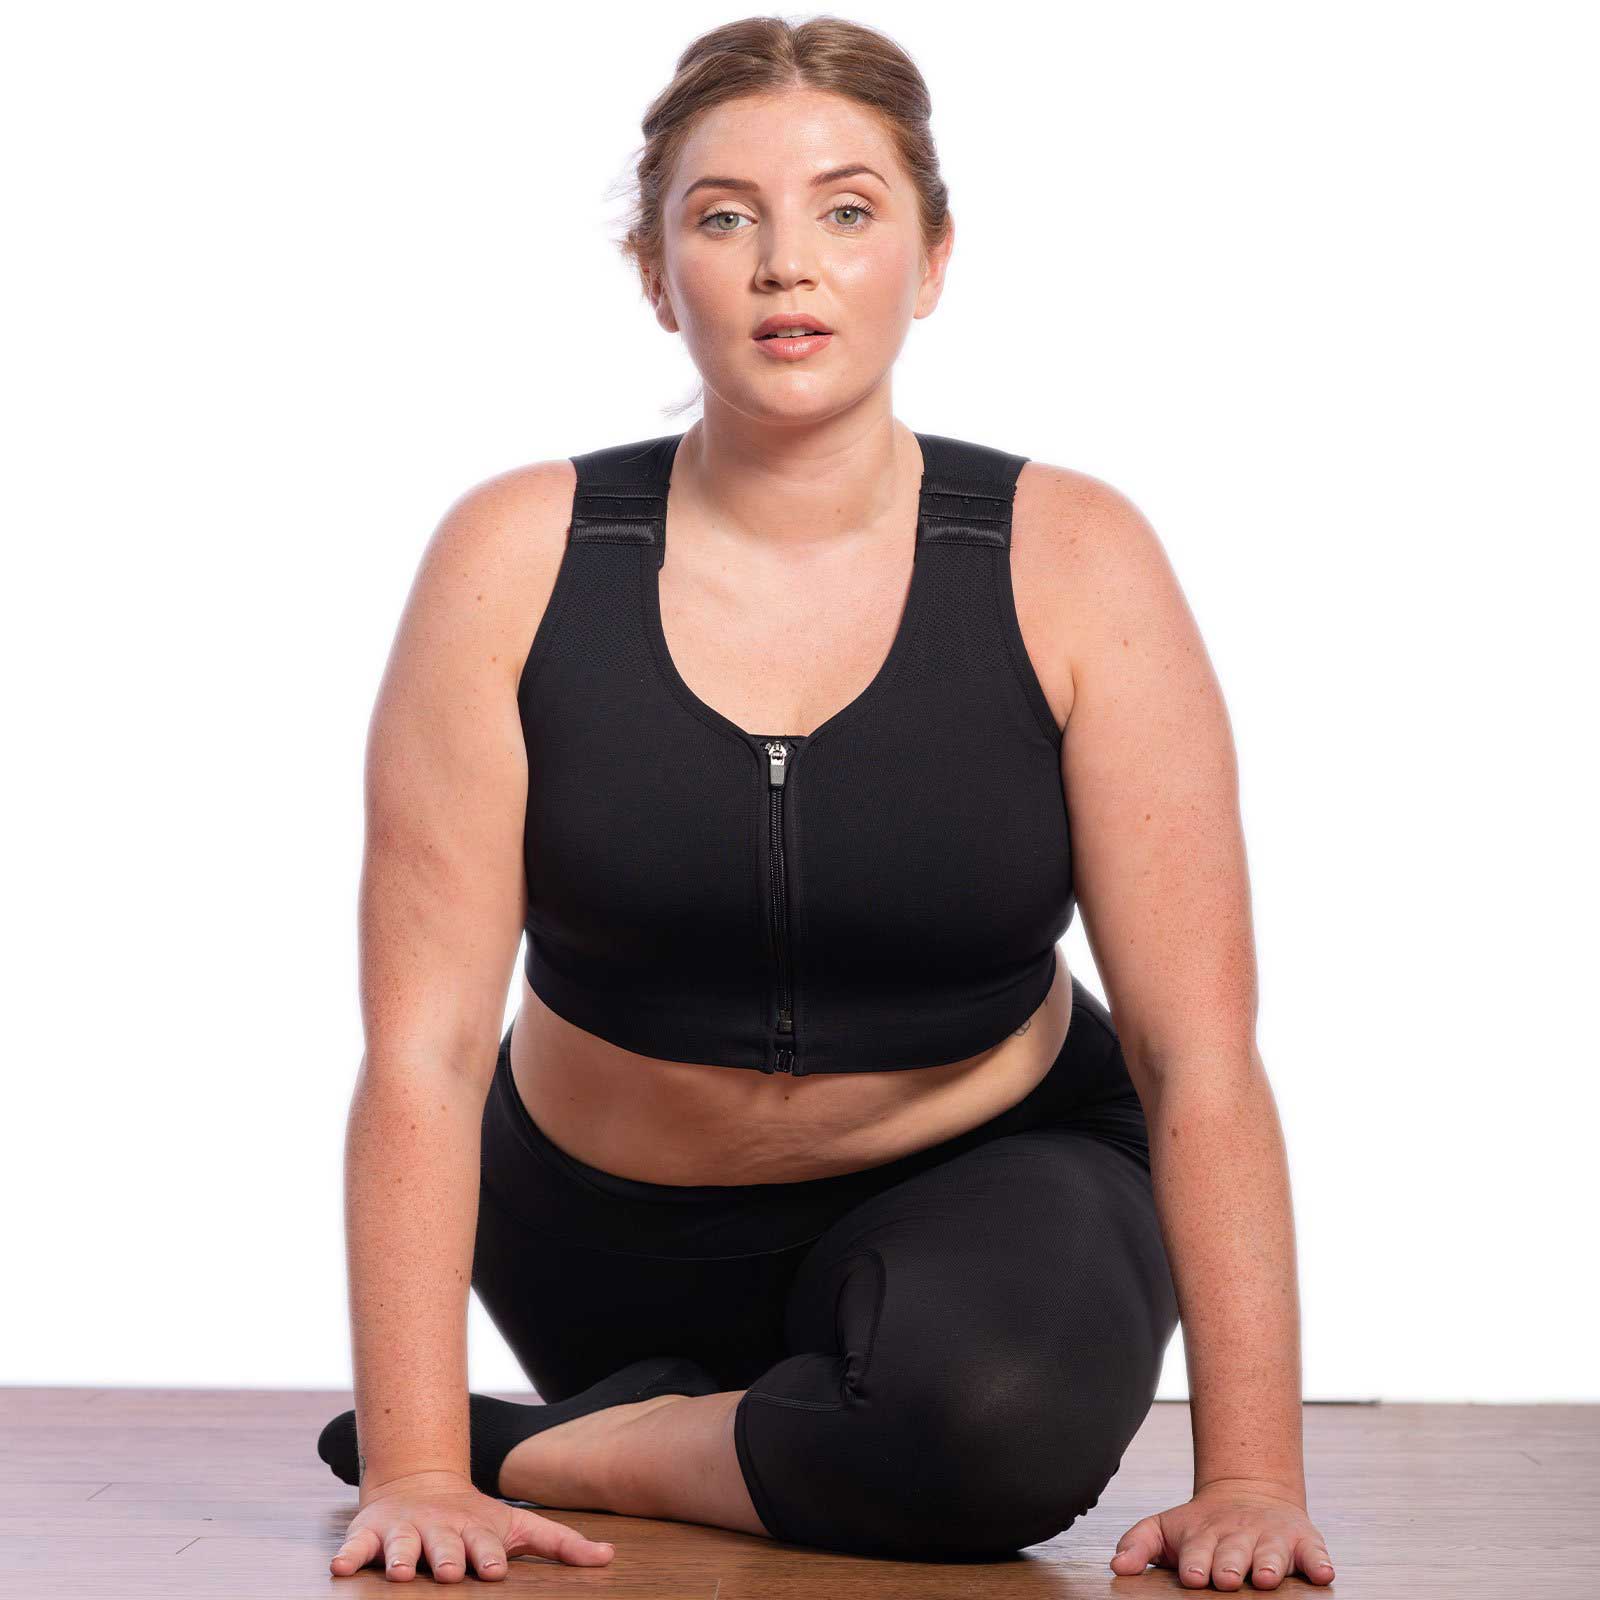 HuggerPRIMA Bra in No Moon Black being used as a yoga bra.  High to Medium Compression, Post-surgical Bra, Lymphedema Bra, Mastectomy Compression Bra, Surgical compression binder. For those who want more support and control, cup sizes, high impact activity support, higher compression sports bra.